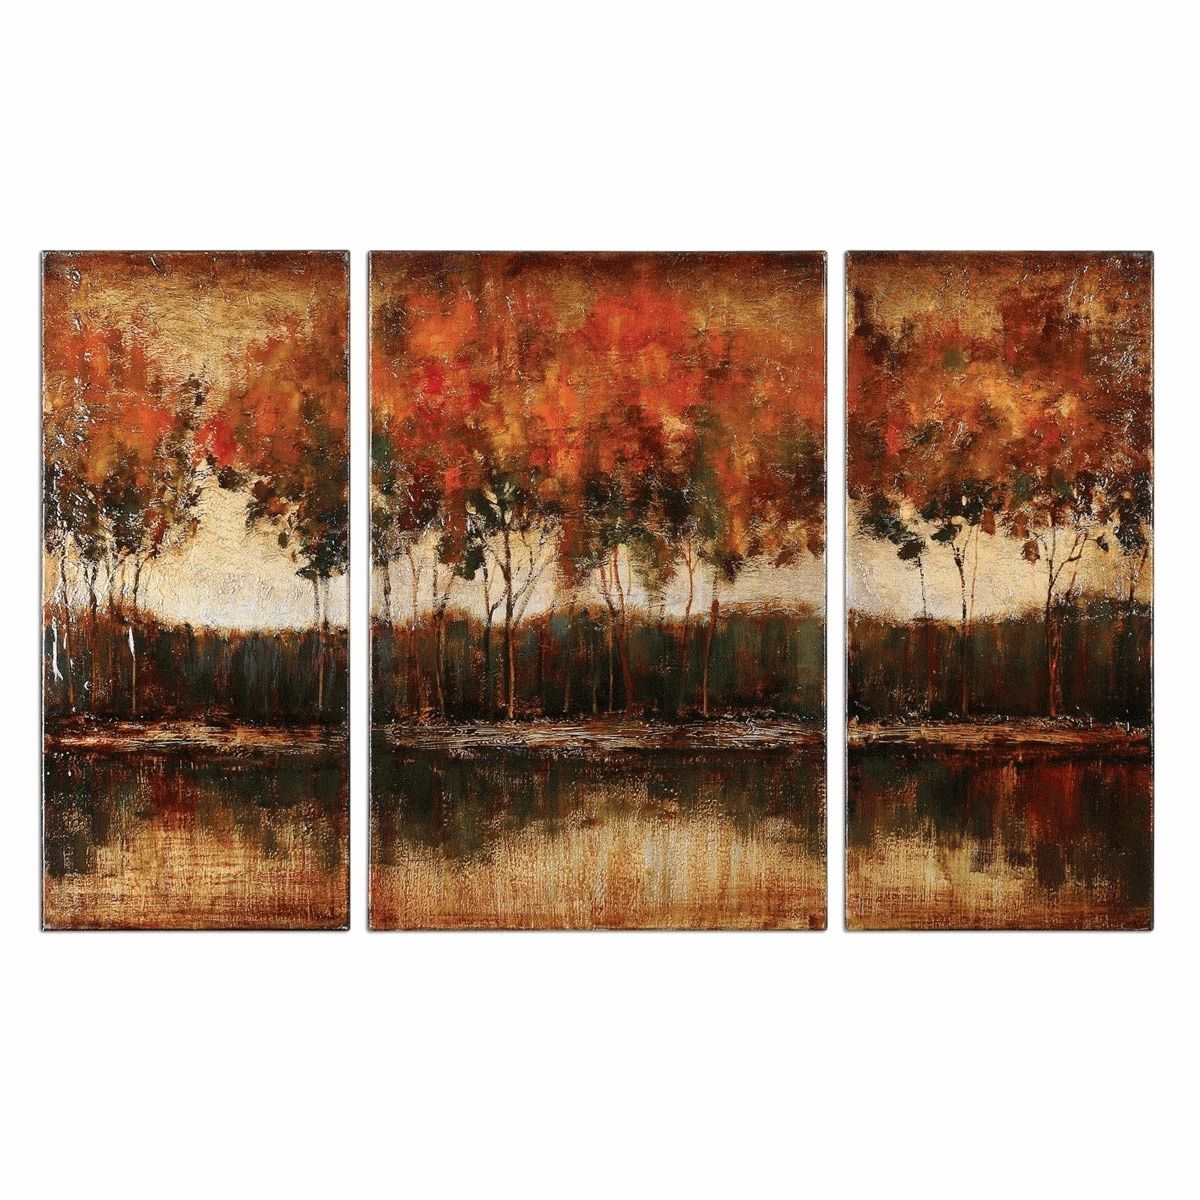 Trilakes Canvas Wall Art – Set Of 3 Pertaining To Best And Newest Wall Art Sets (View 12 of 15)